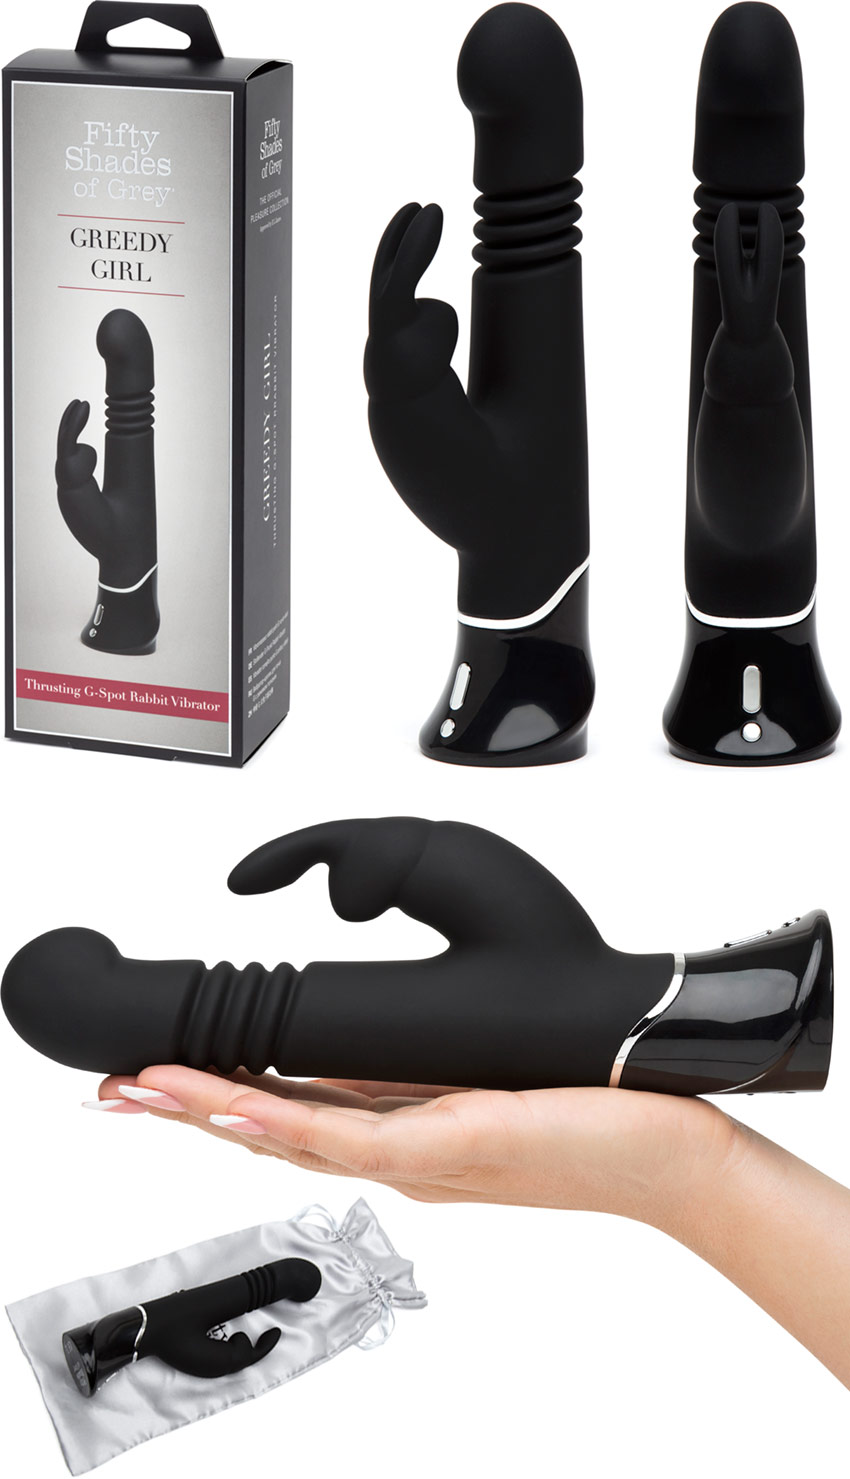 Vibromasseur Greedy Girl Thrusting G-Spot - Fifty Shades of Grey